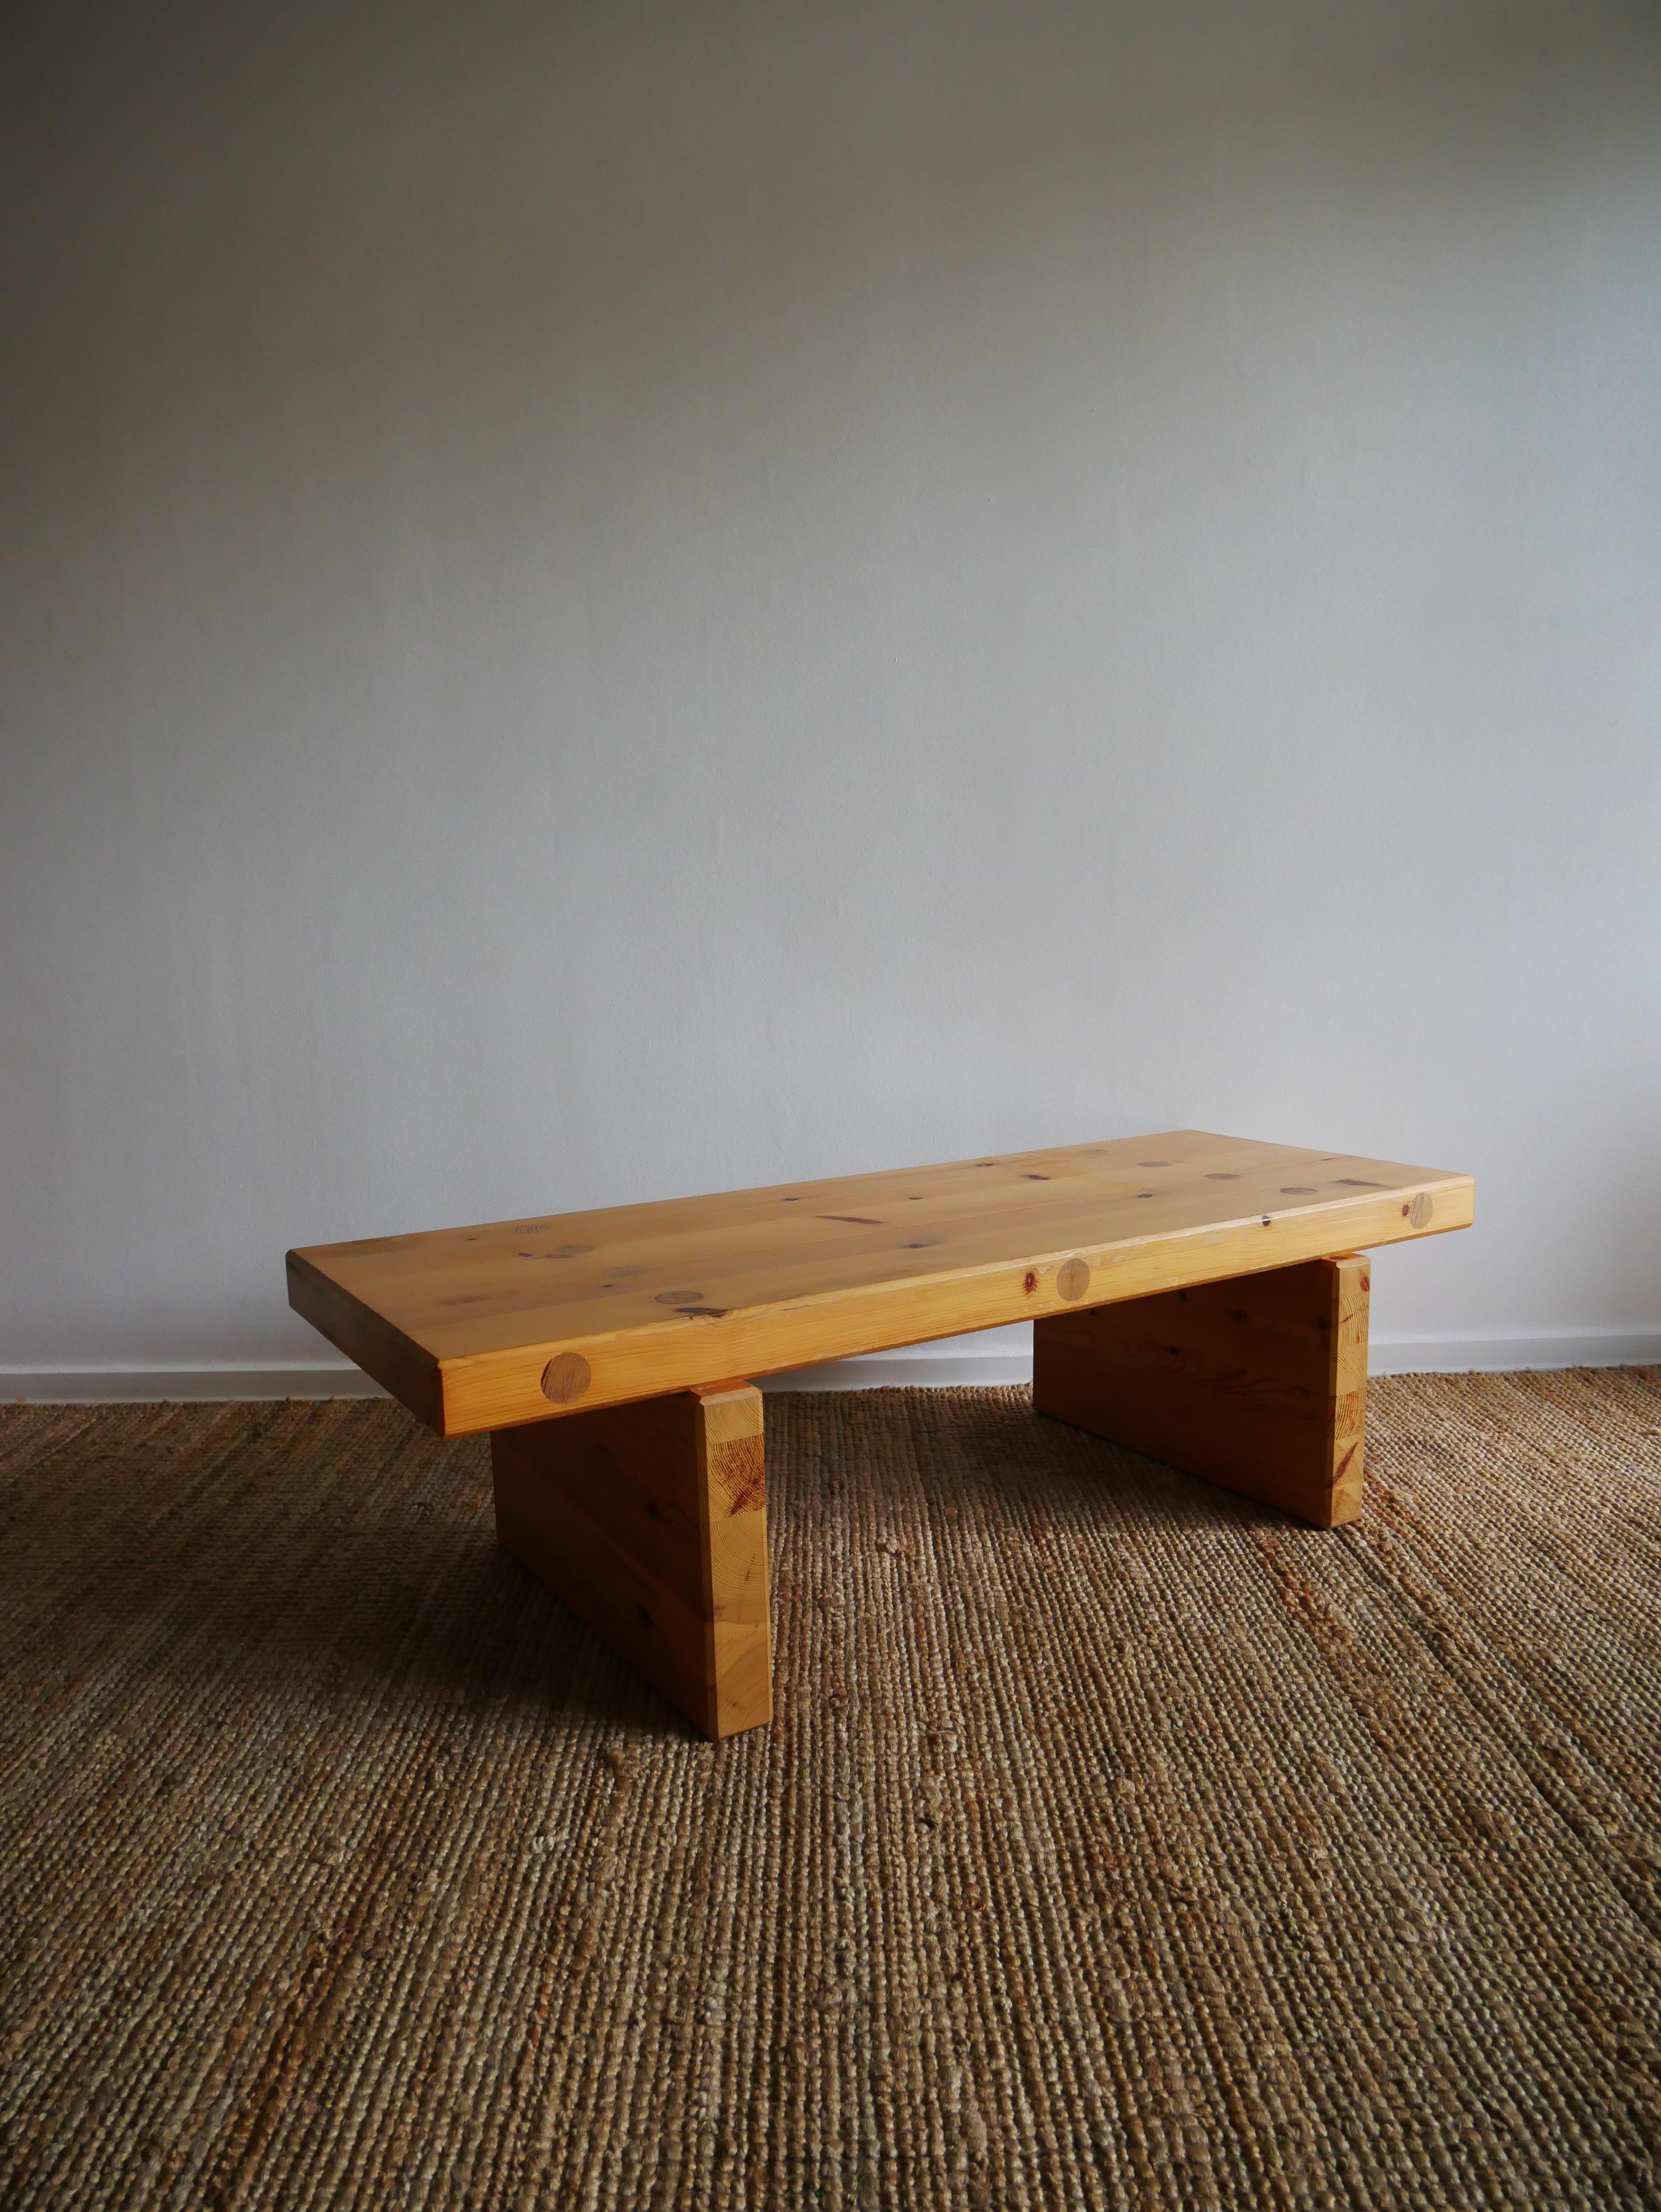 A timeless Scandinavian Modern bench or coffee table in solid thick pine by Roland Wilhelmsson, executed in Sweden, 1970.
Characteristic visible wood joints and great craftsmanship.